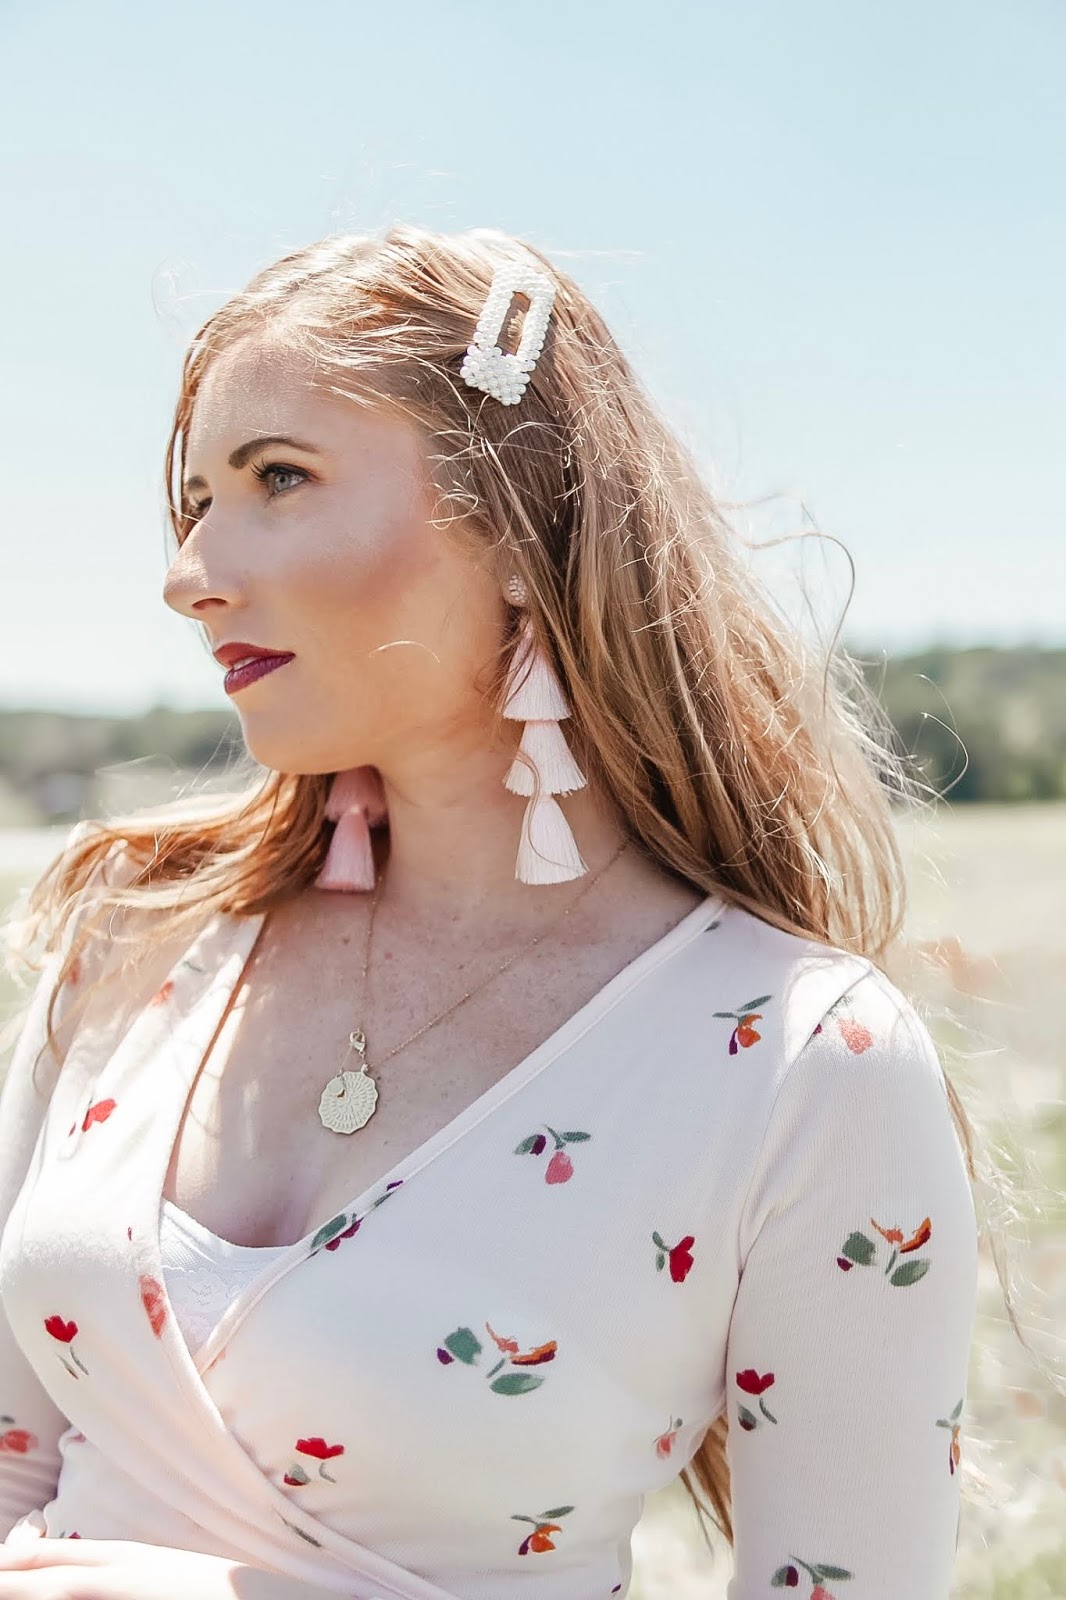 affordable by amanda: how to style 70s trends for spring with forever 21 fashion. pearl barrettes and extensions from barefoot blonde chestnut extensions